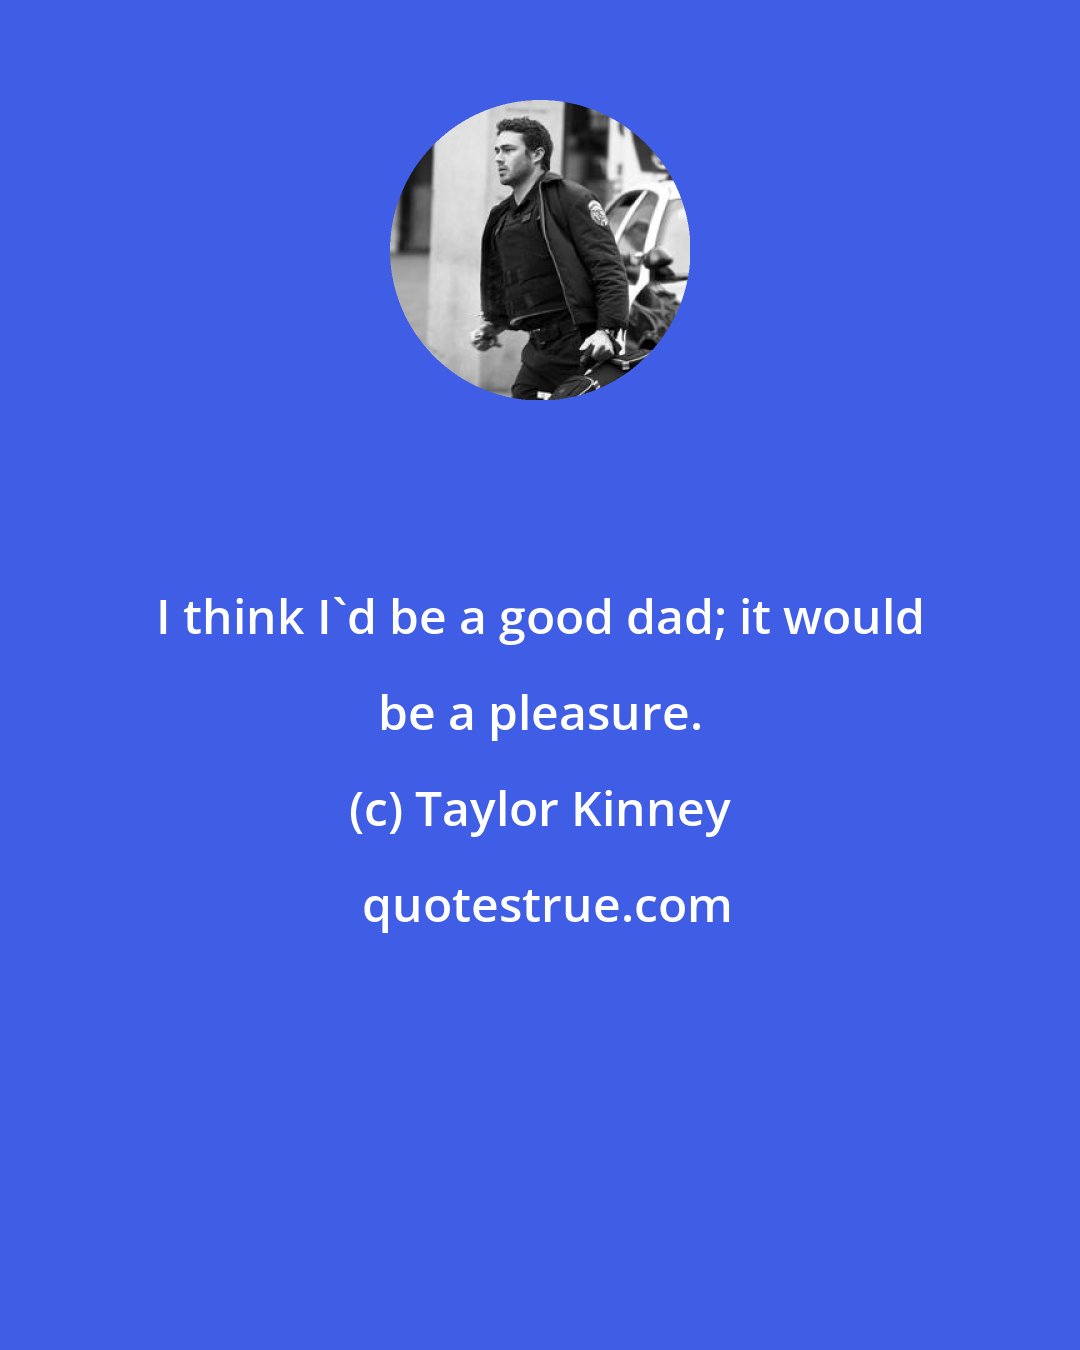 Taylor Kinney: I think I'd be a good dad; it would be a pleasure.